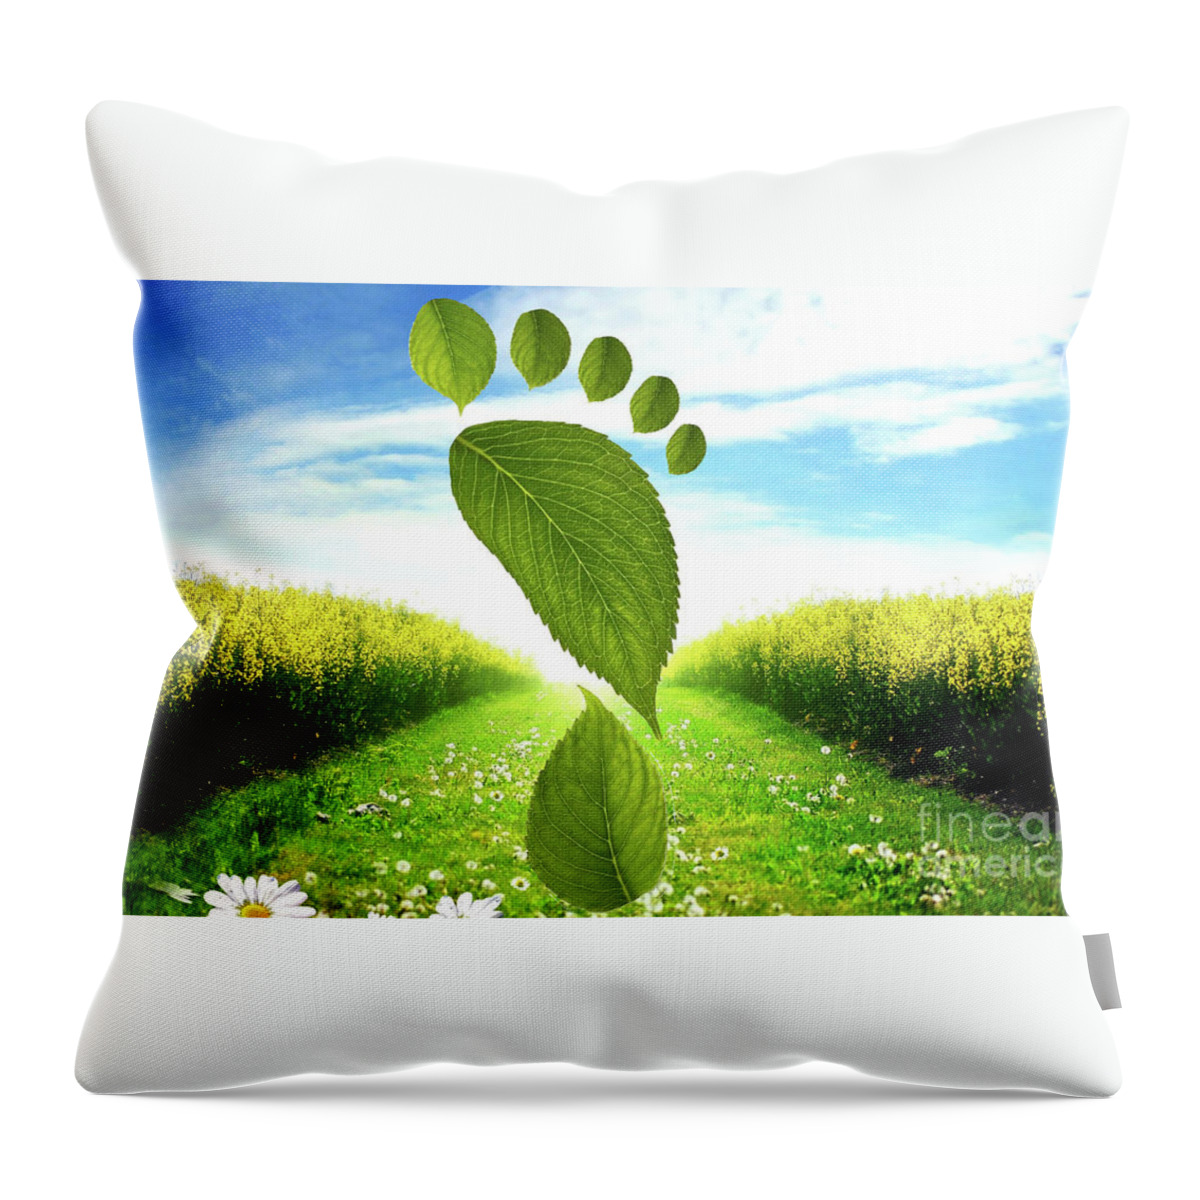 Leaves Throw Pillow featuring the photograph Carbon Footprint - Doc Braham - All Rights Reserved by Doc Braham